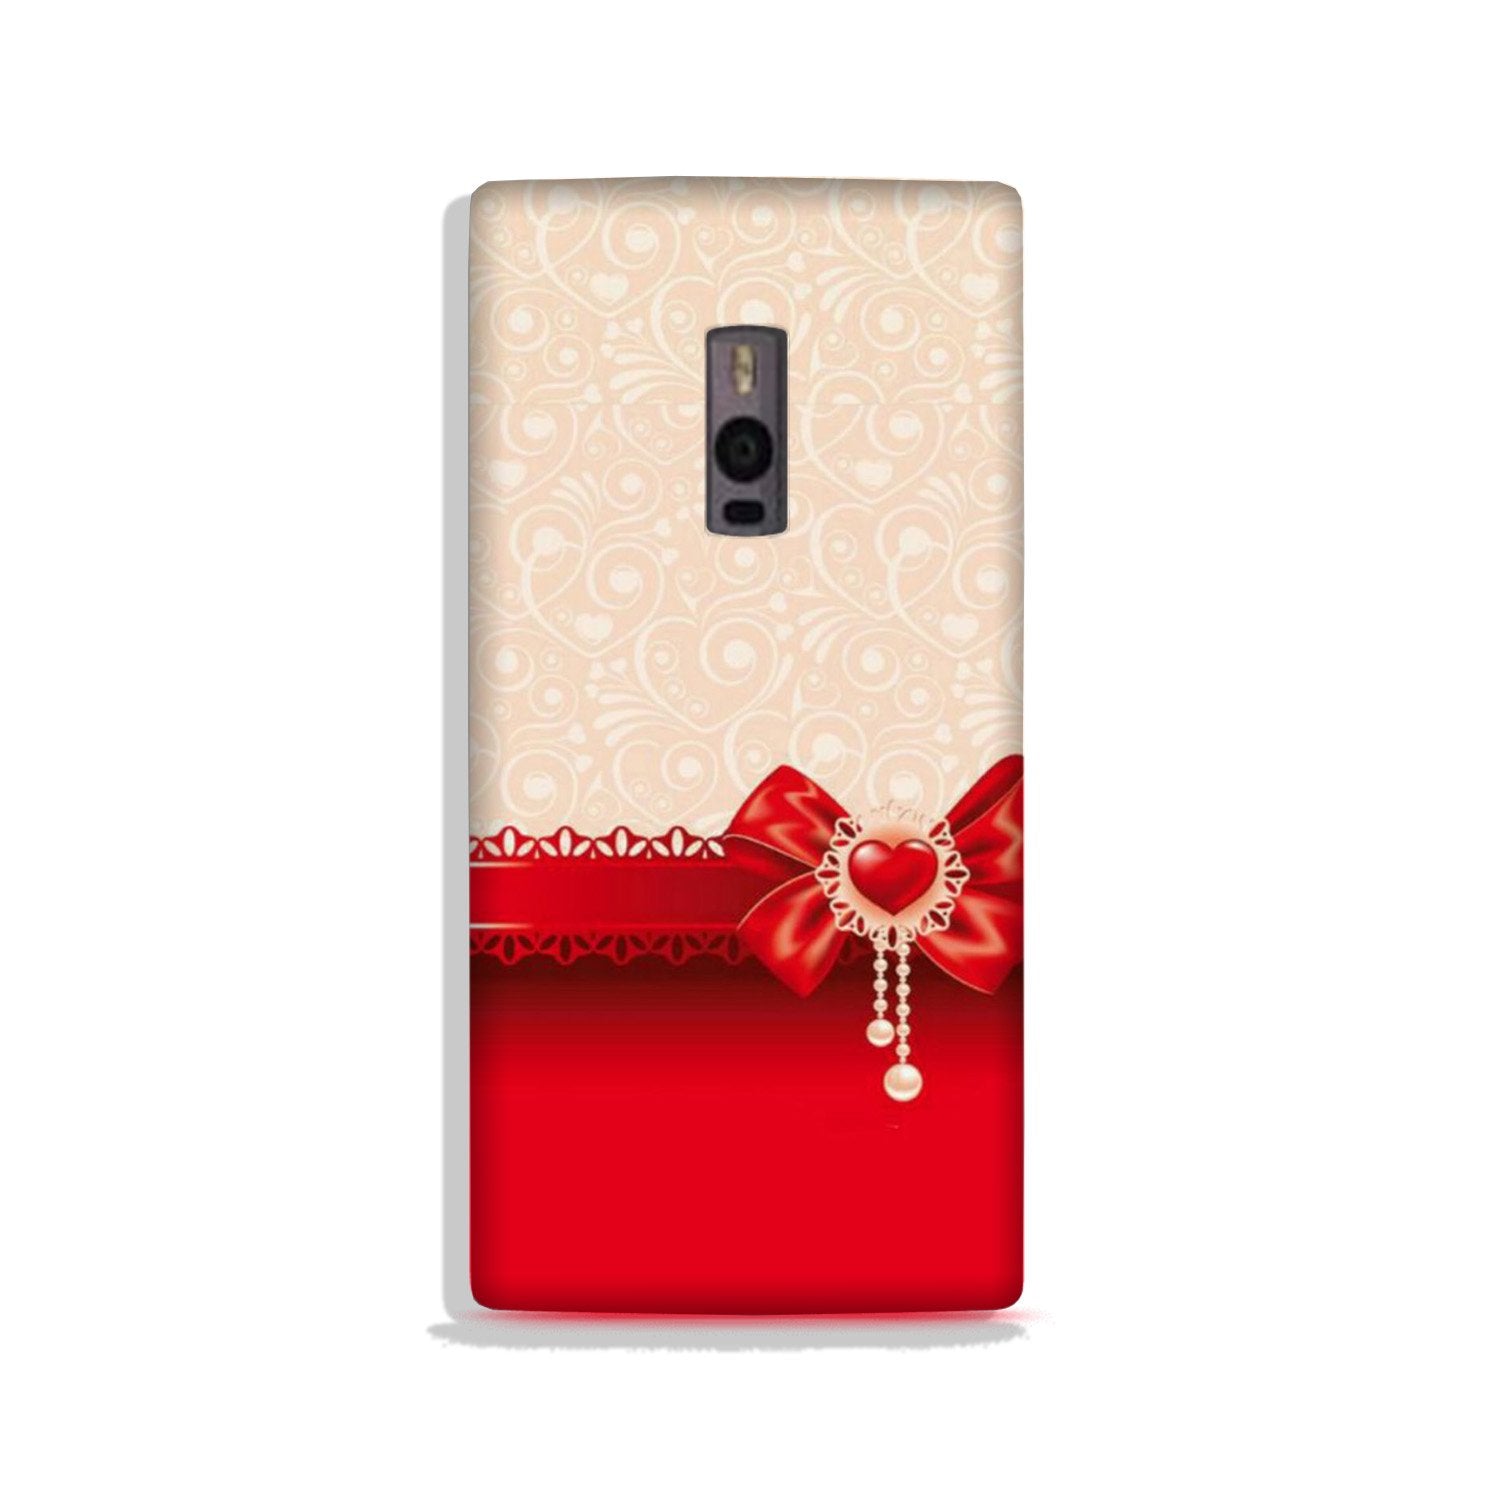 Gift Wrap3 Case for OnePlus 2